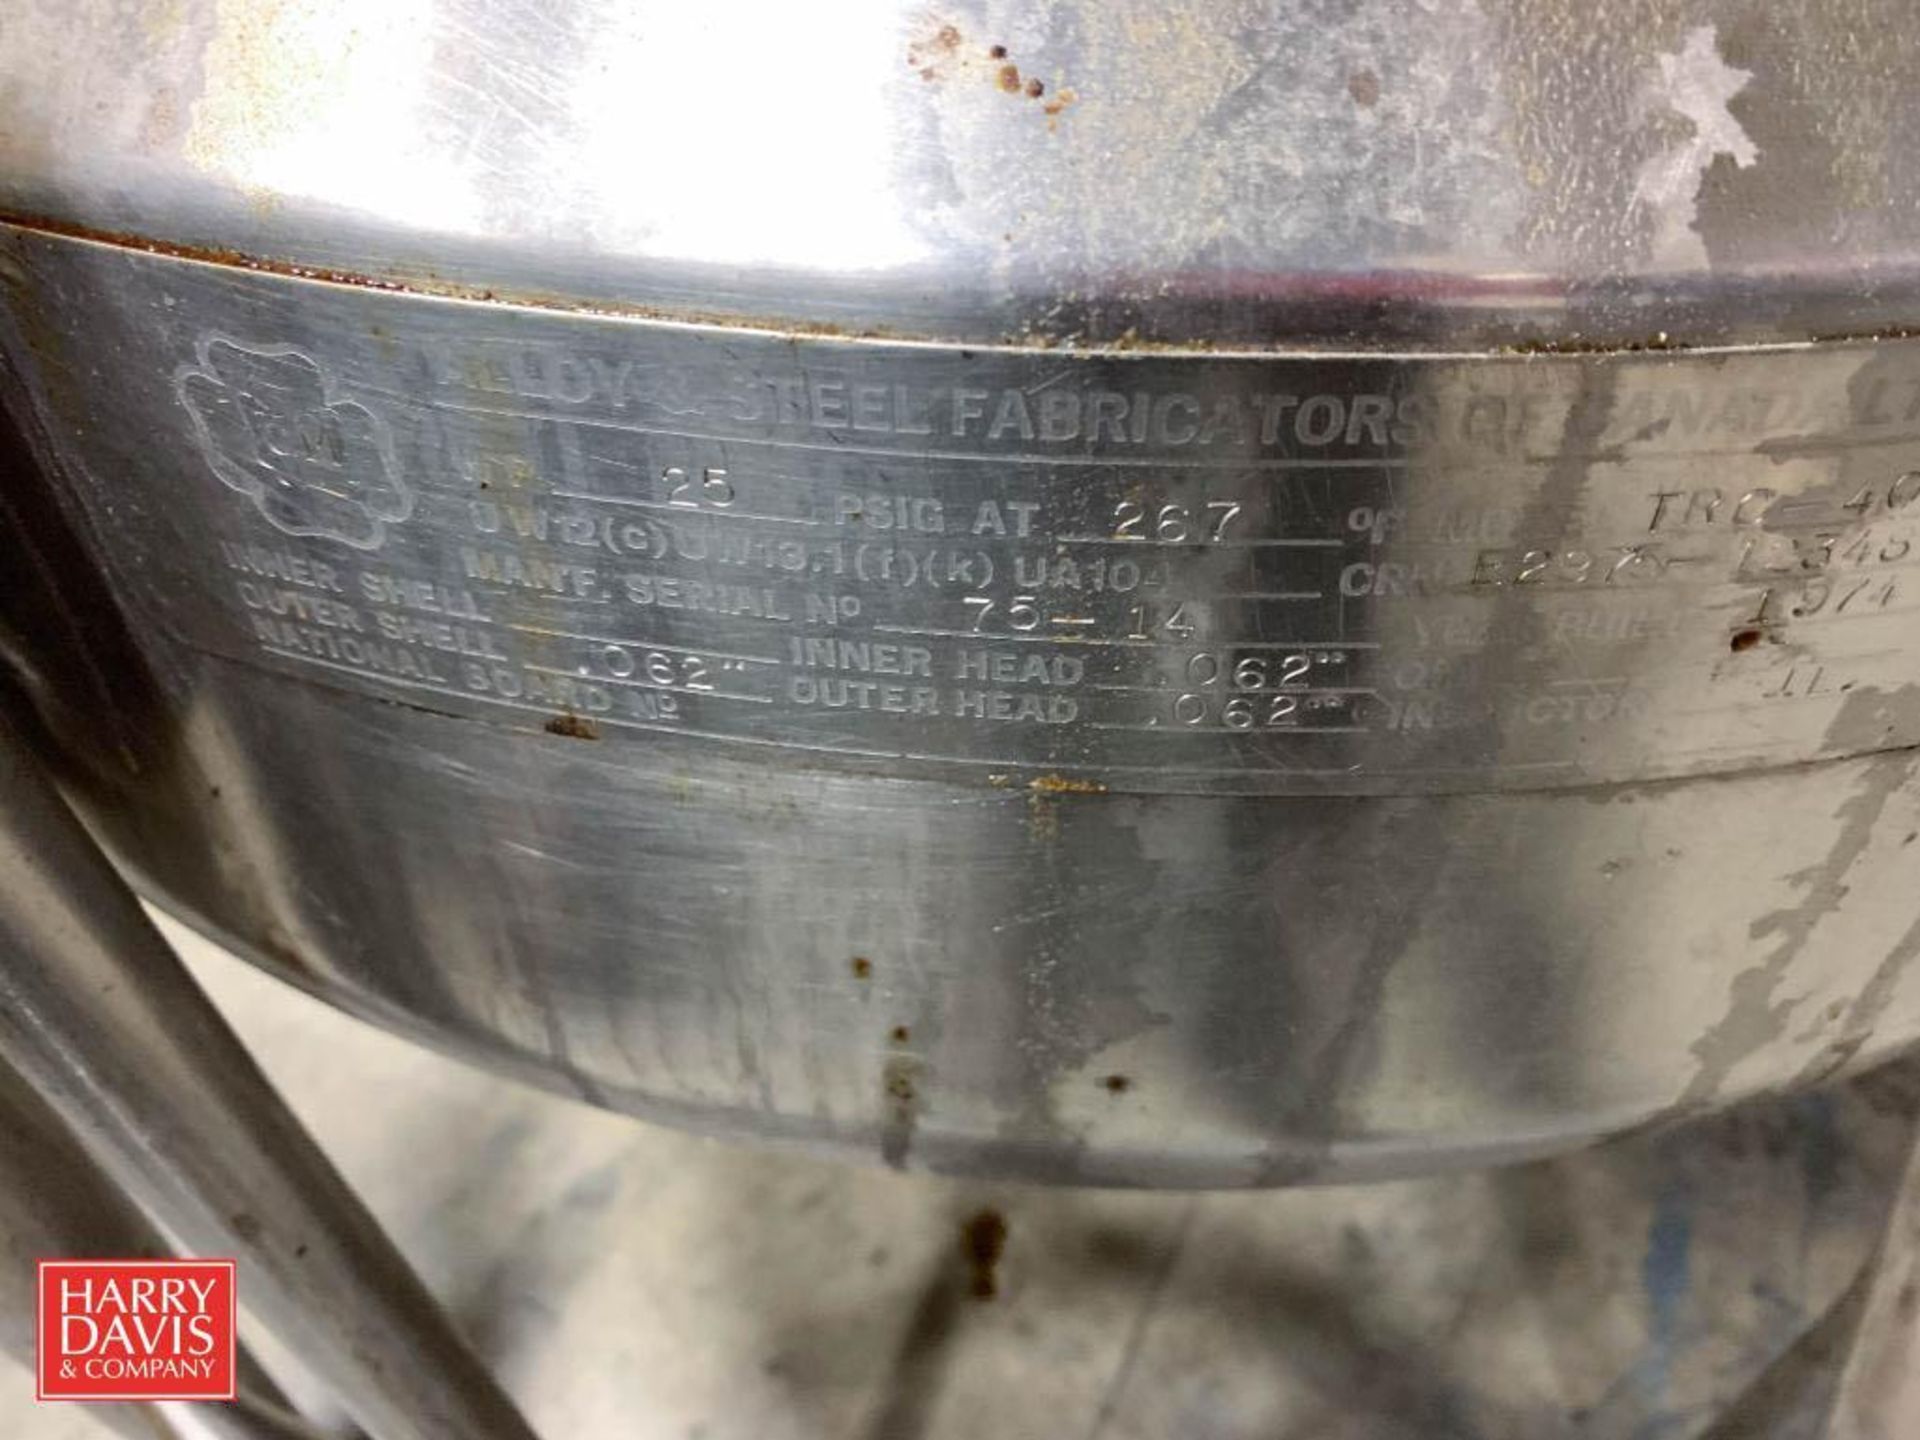 Alloy and Steel Fabrication of Canada 40 Gallon S/S Jacketed Kettle, Model: TRC-40, S/N: E2975-12348 - Image 2 of 2